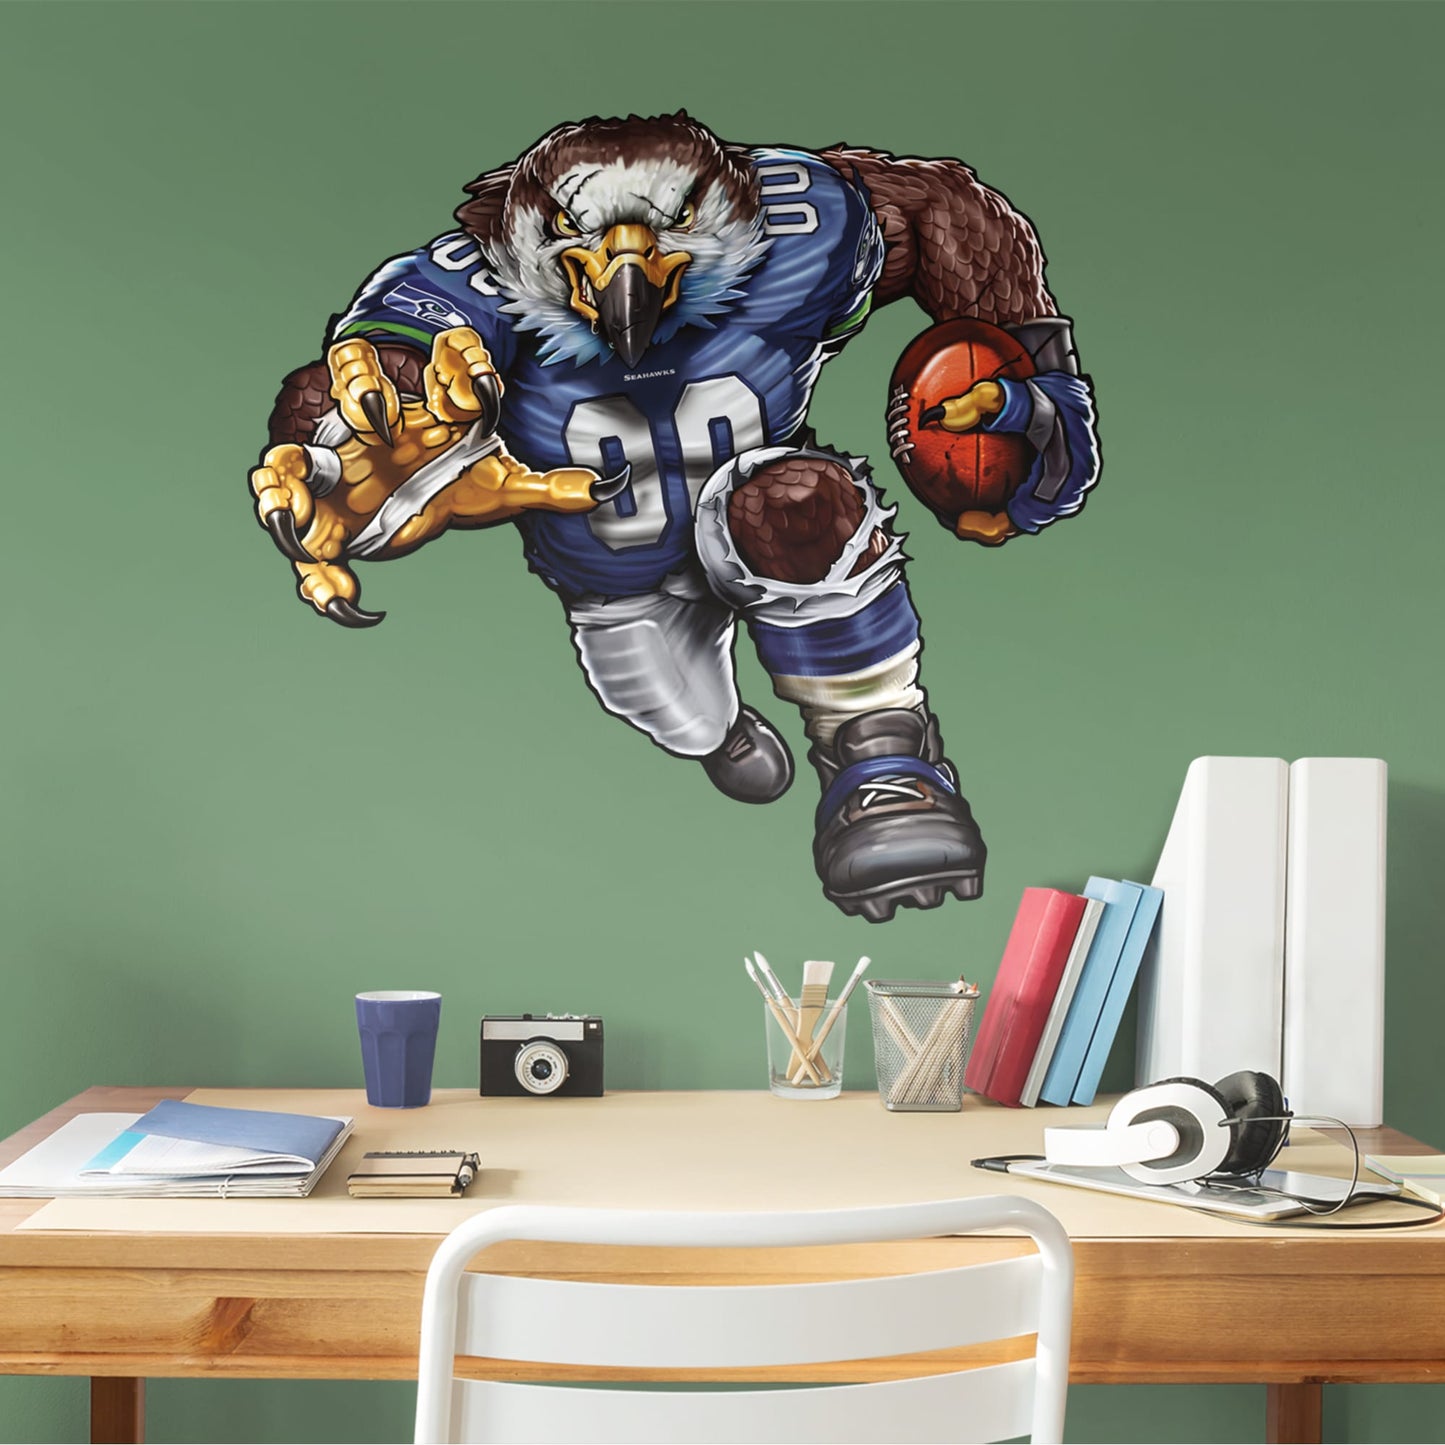 Seattle Seahawks: Sinister Seahawk - Officially Licensed NFL Removable Wall Decal